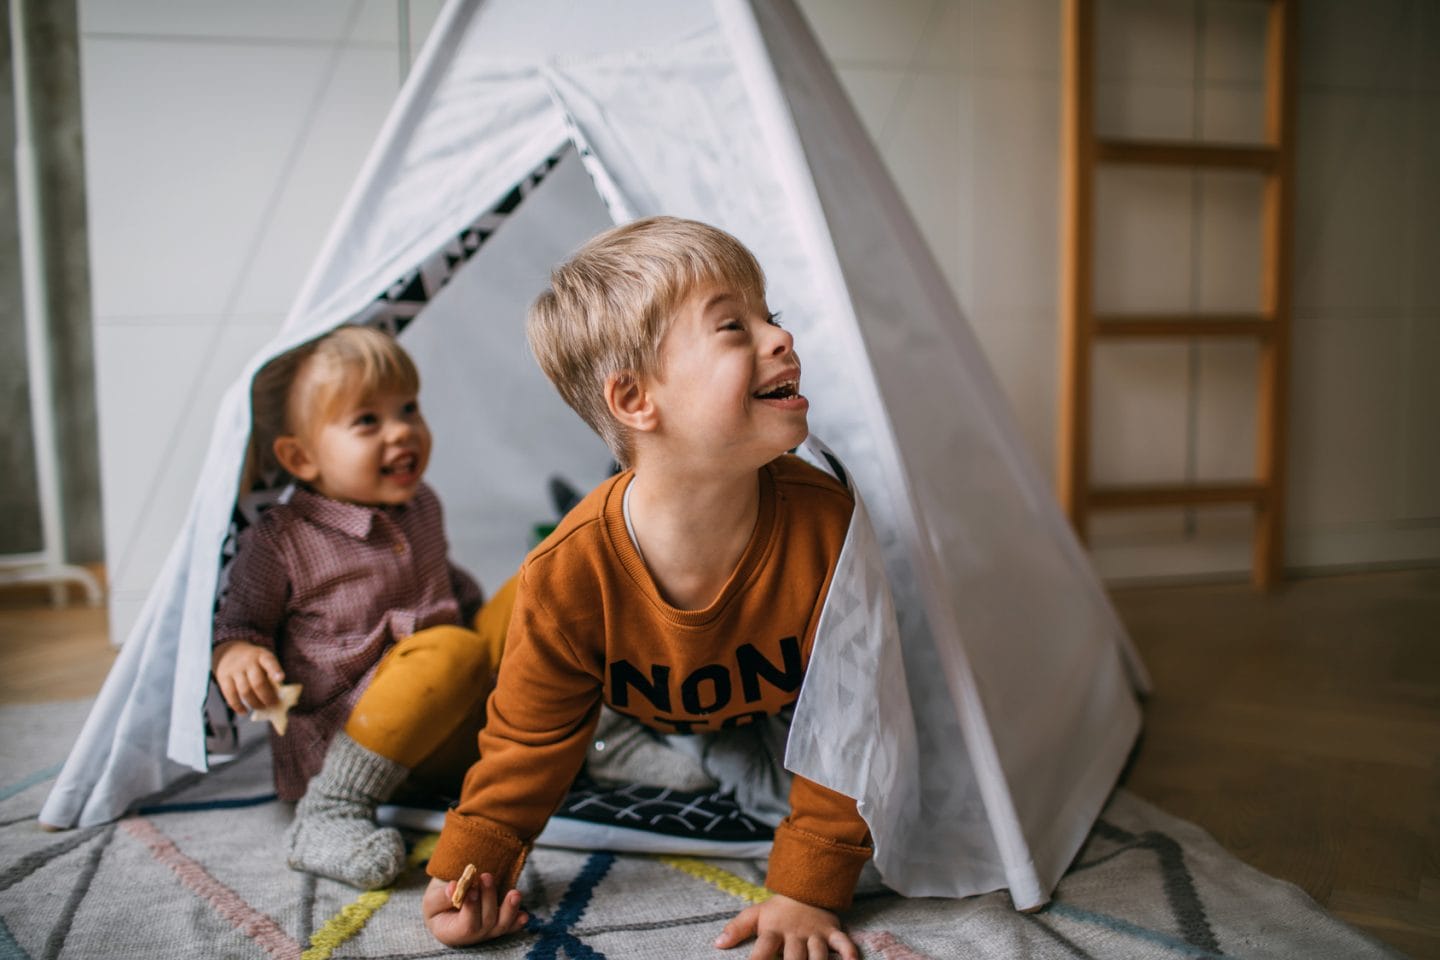 two young boys playing in tent